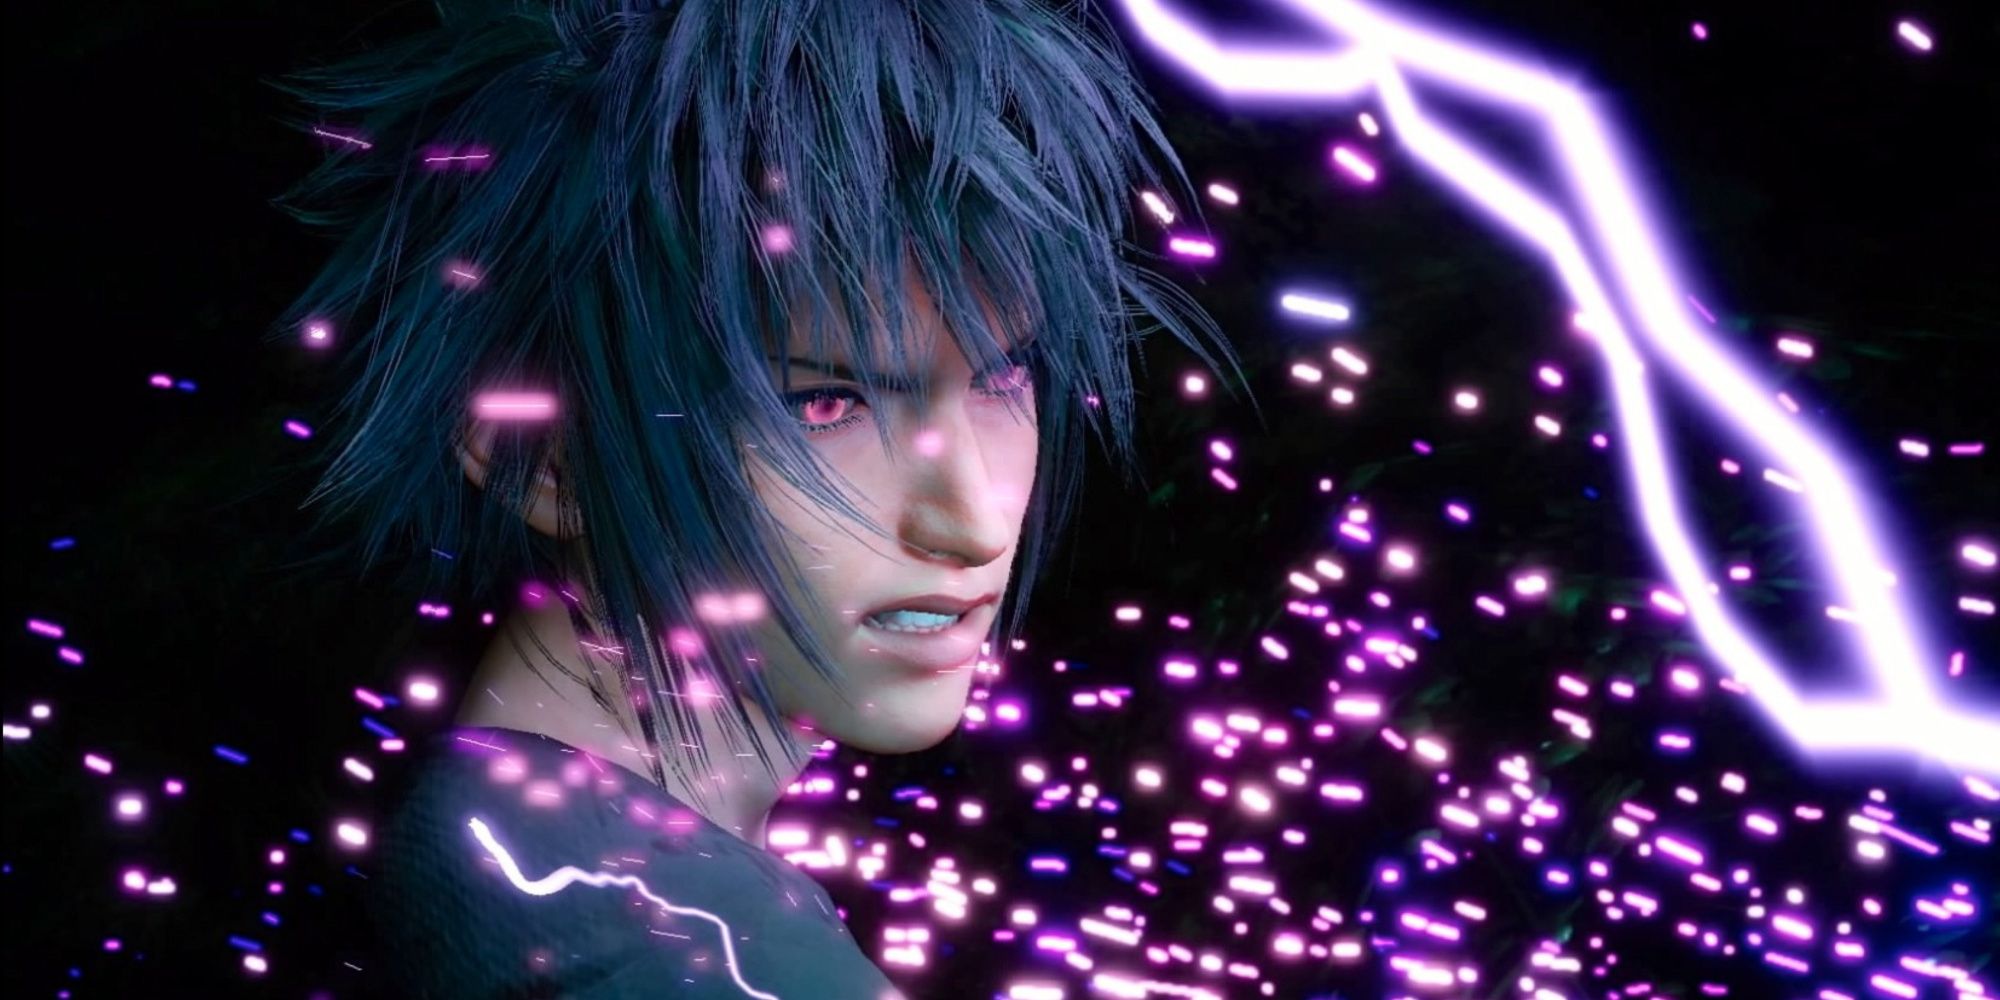 Noctis from Final Fantasy 15